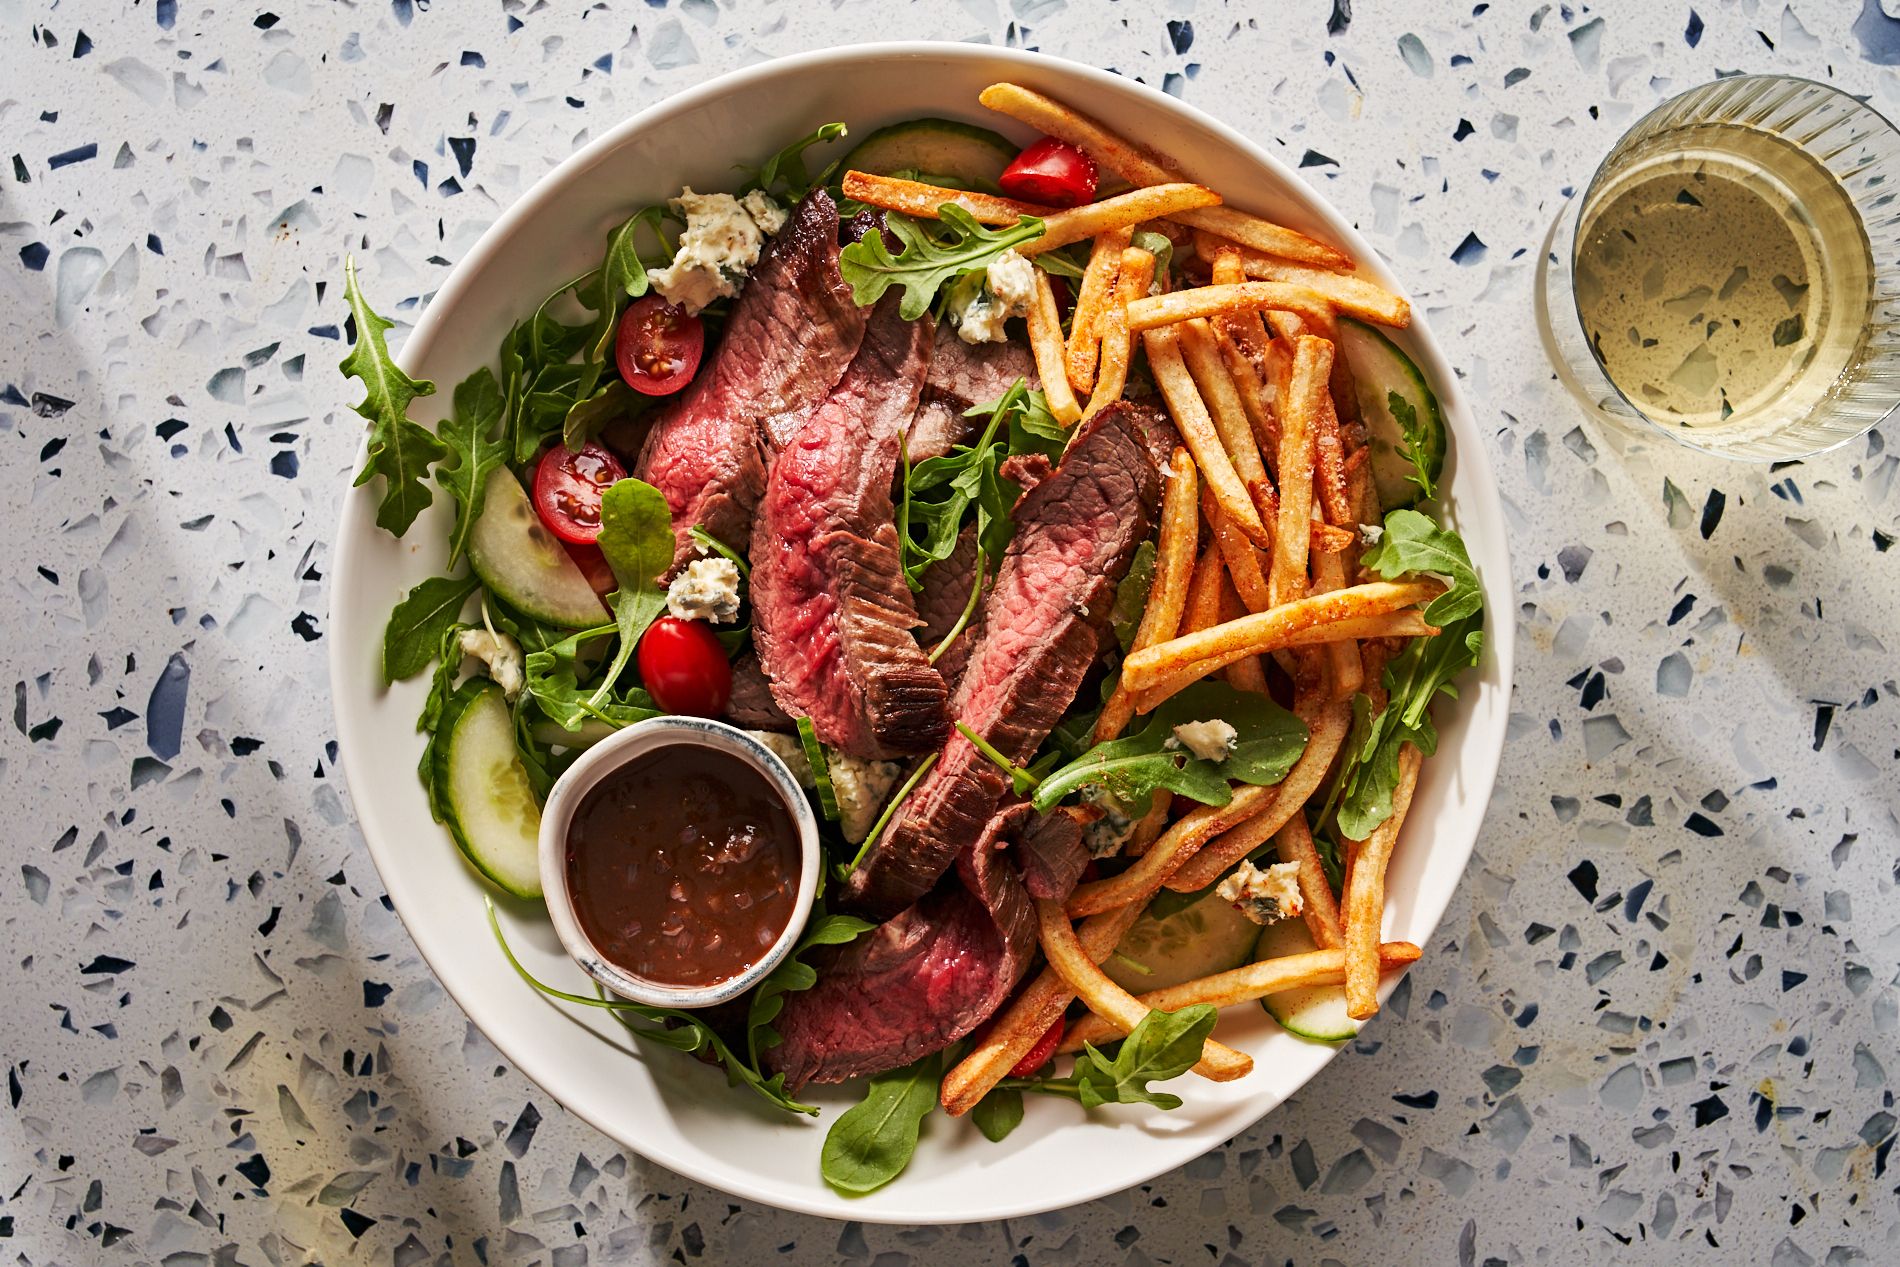 Flank Steak So Tender and Delicious They'll Think It's Filet